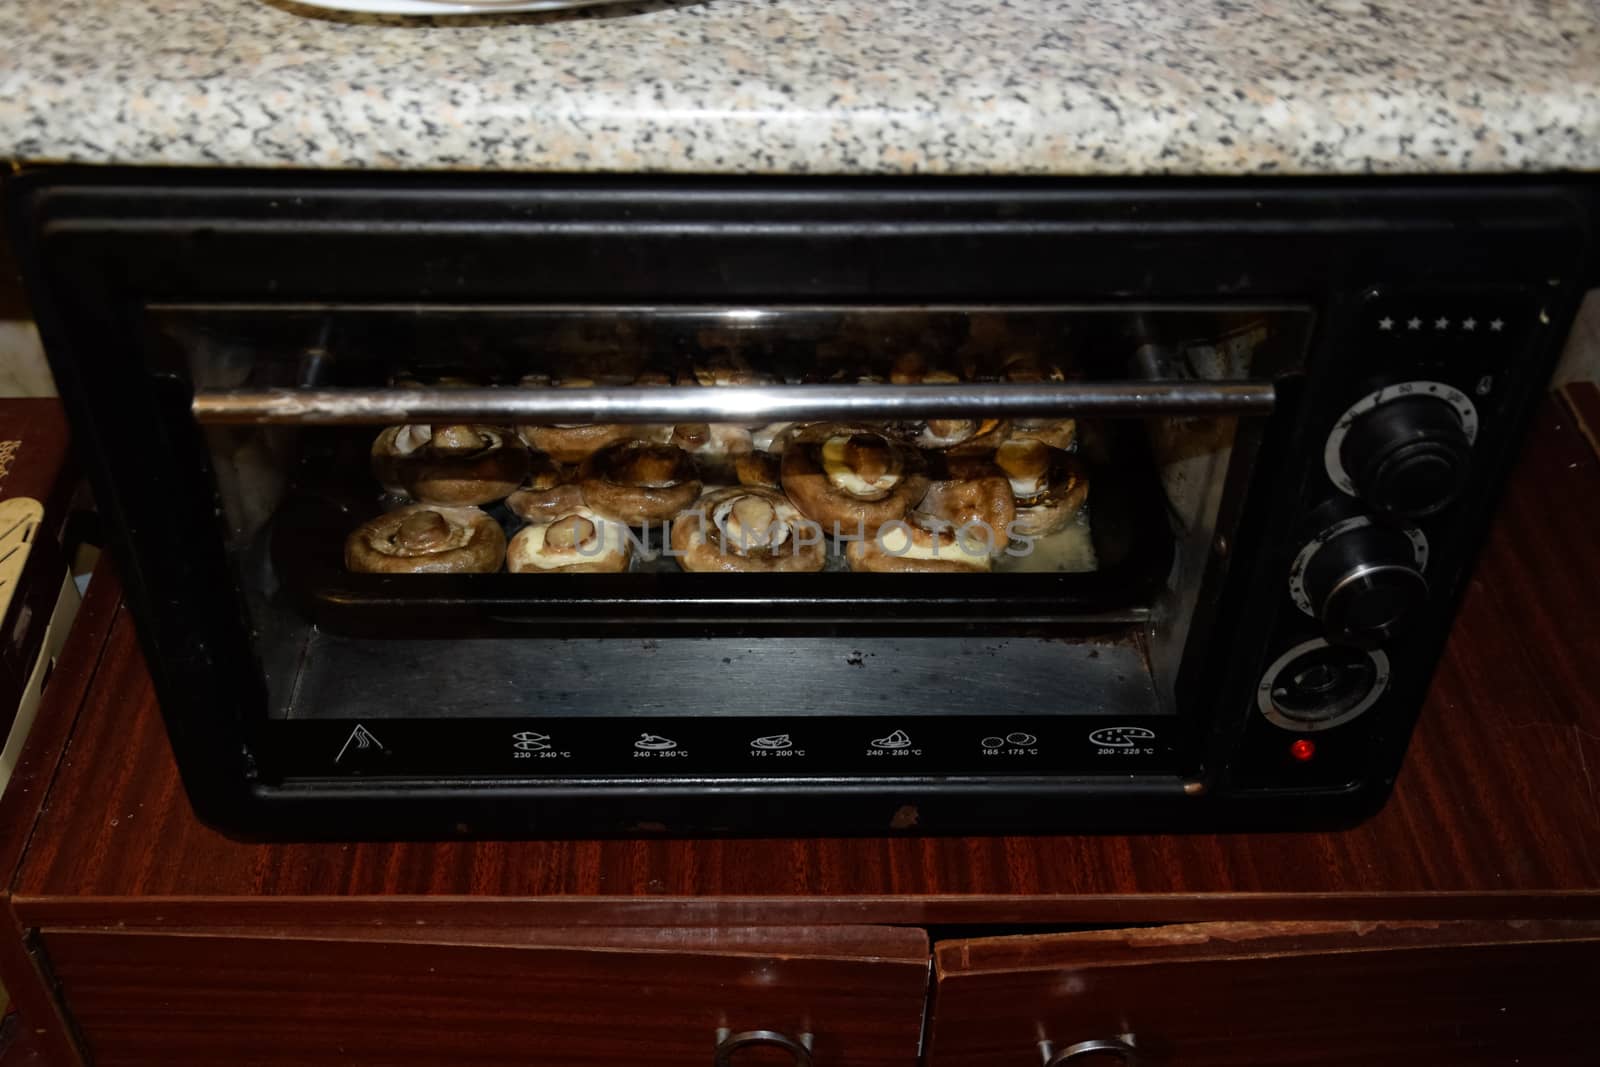 Baking mushrooms in an electric oven. Mushrooms are baked in the oven.